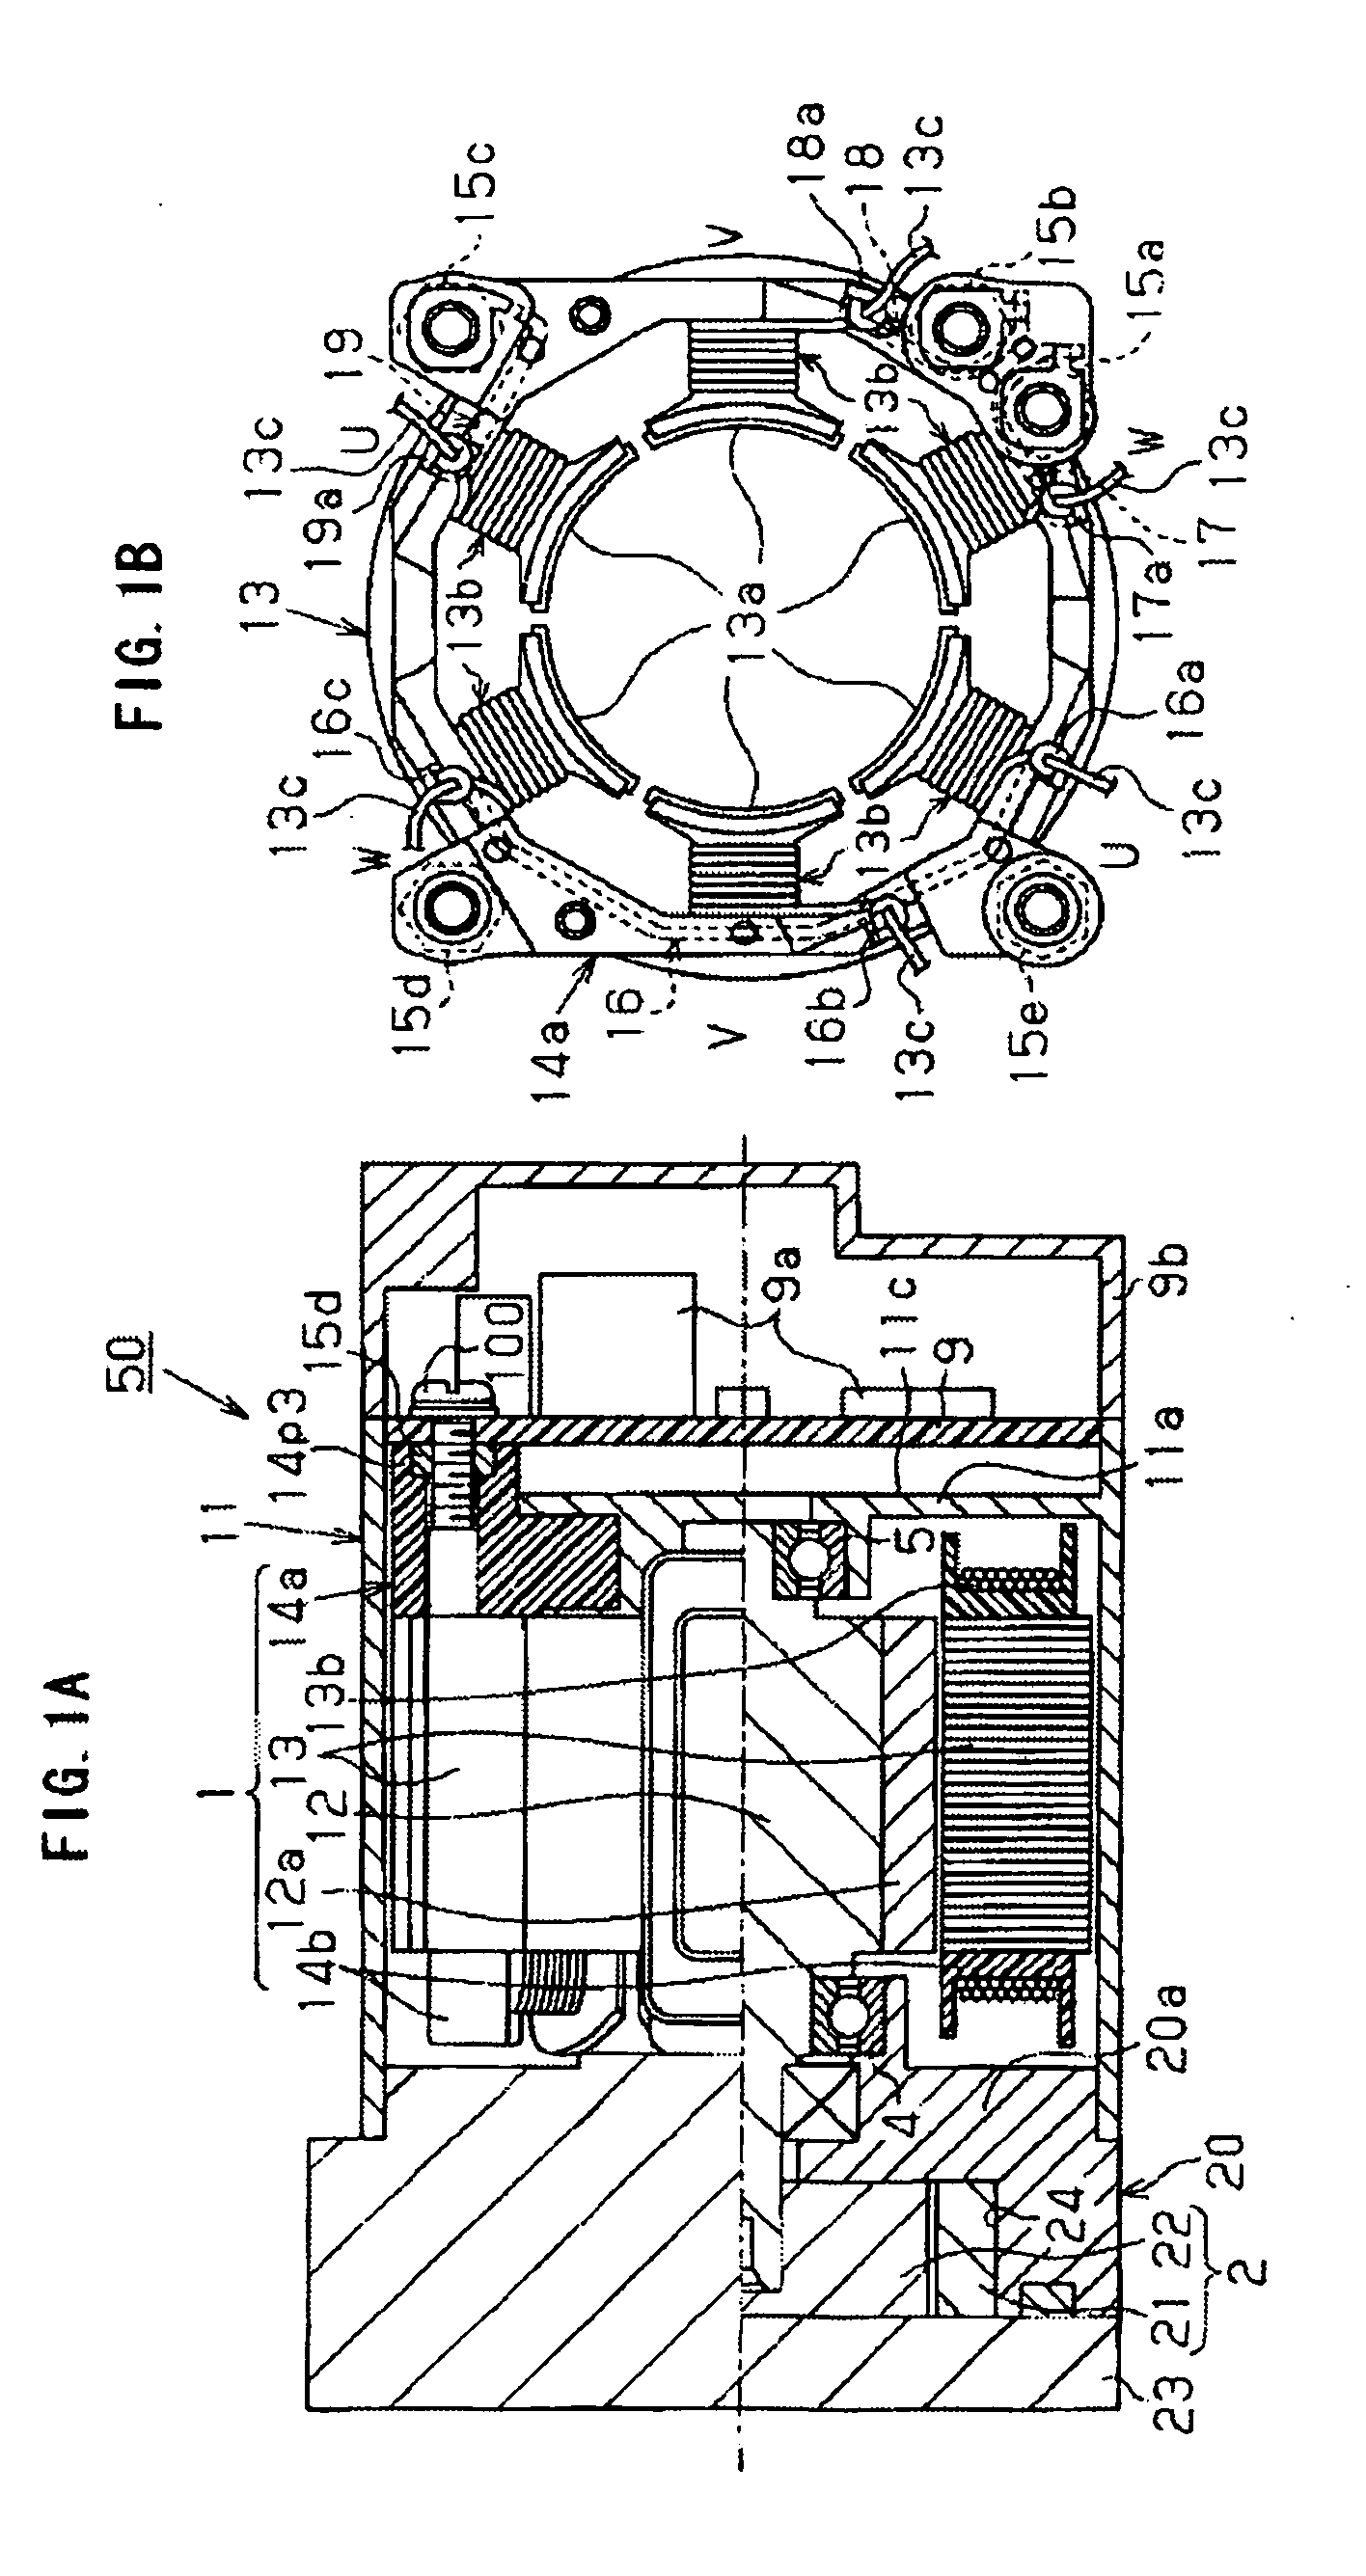 Electric motor and electric pump unit